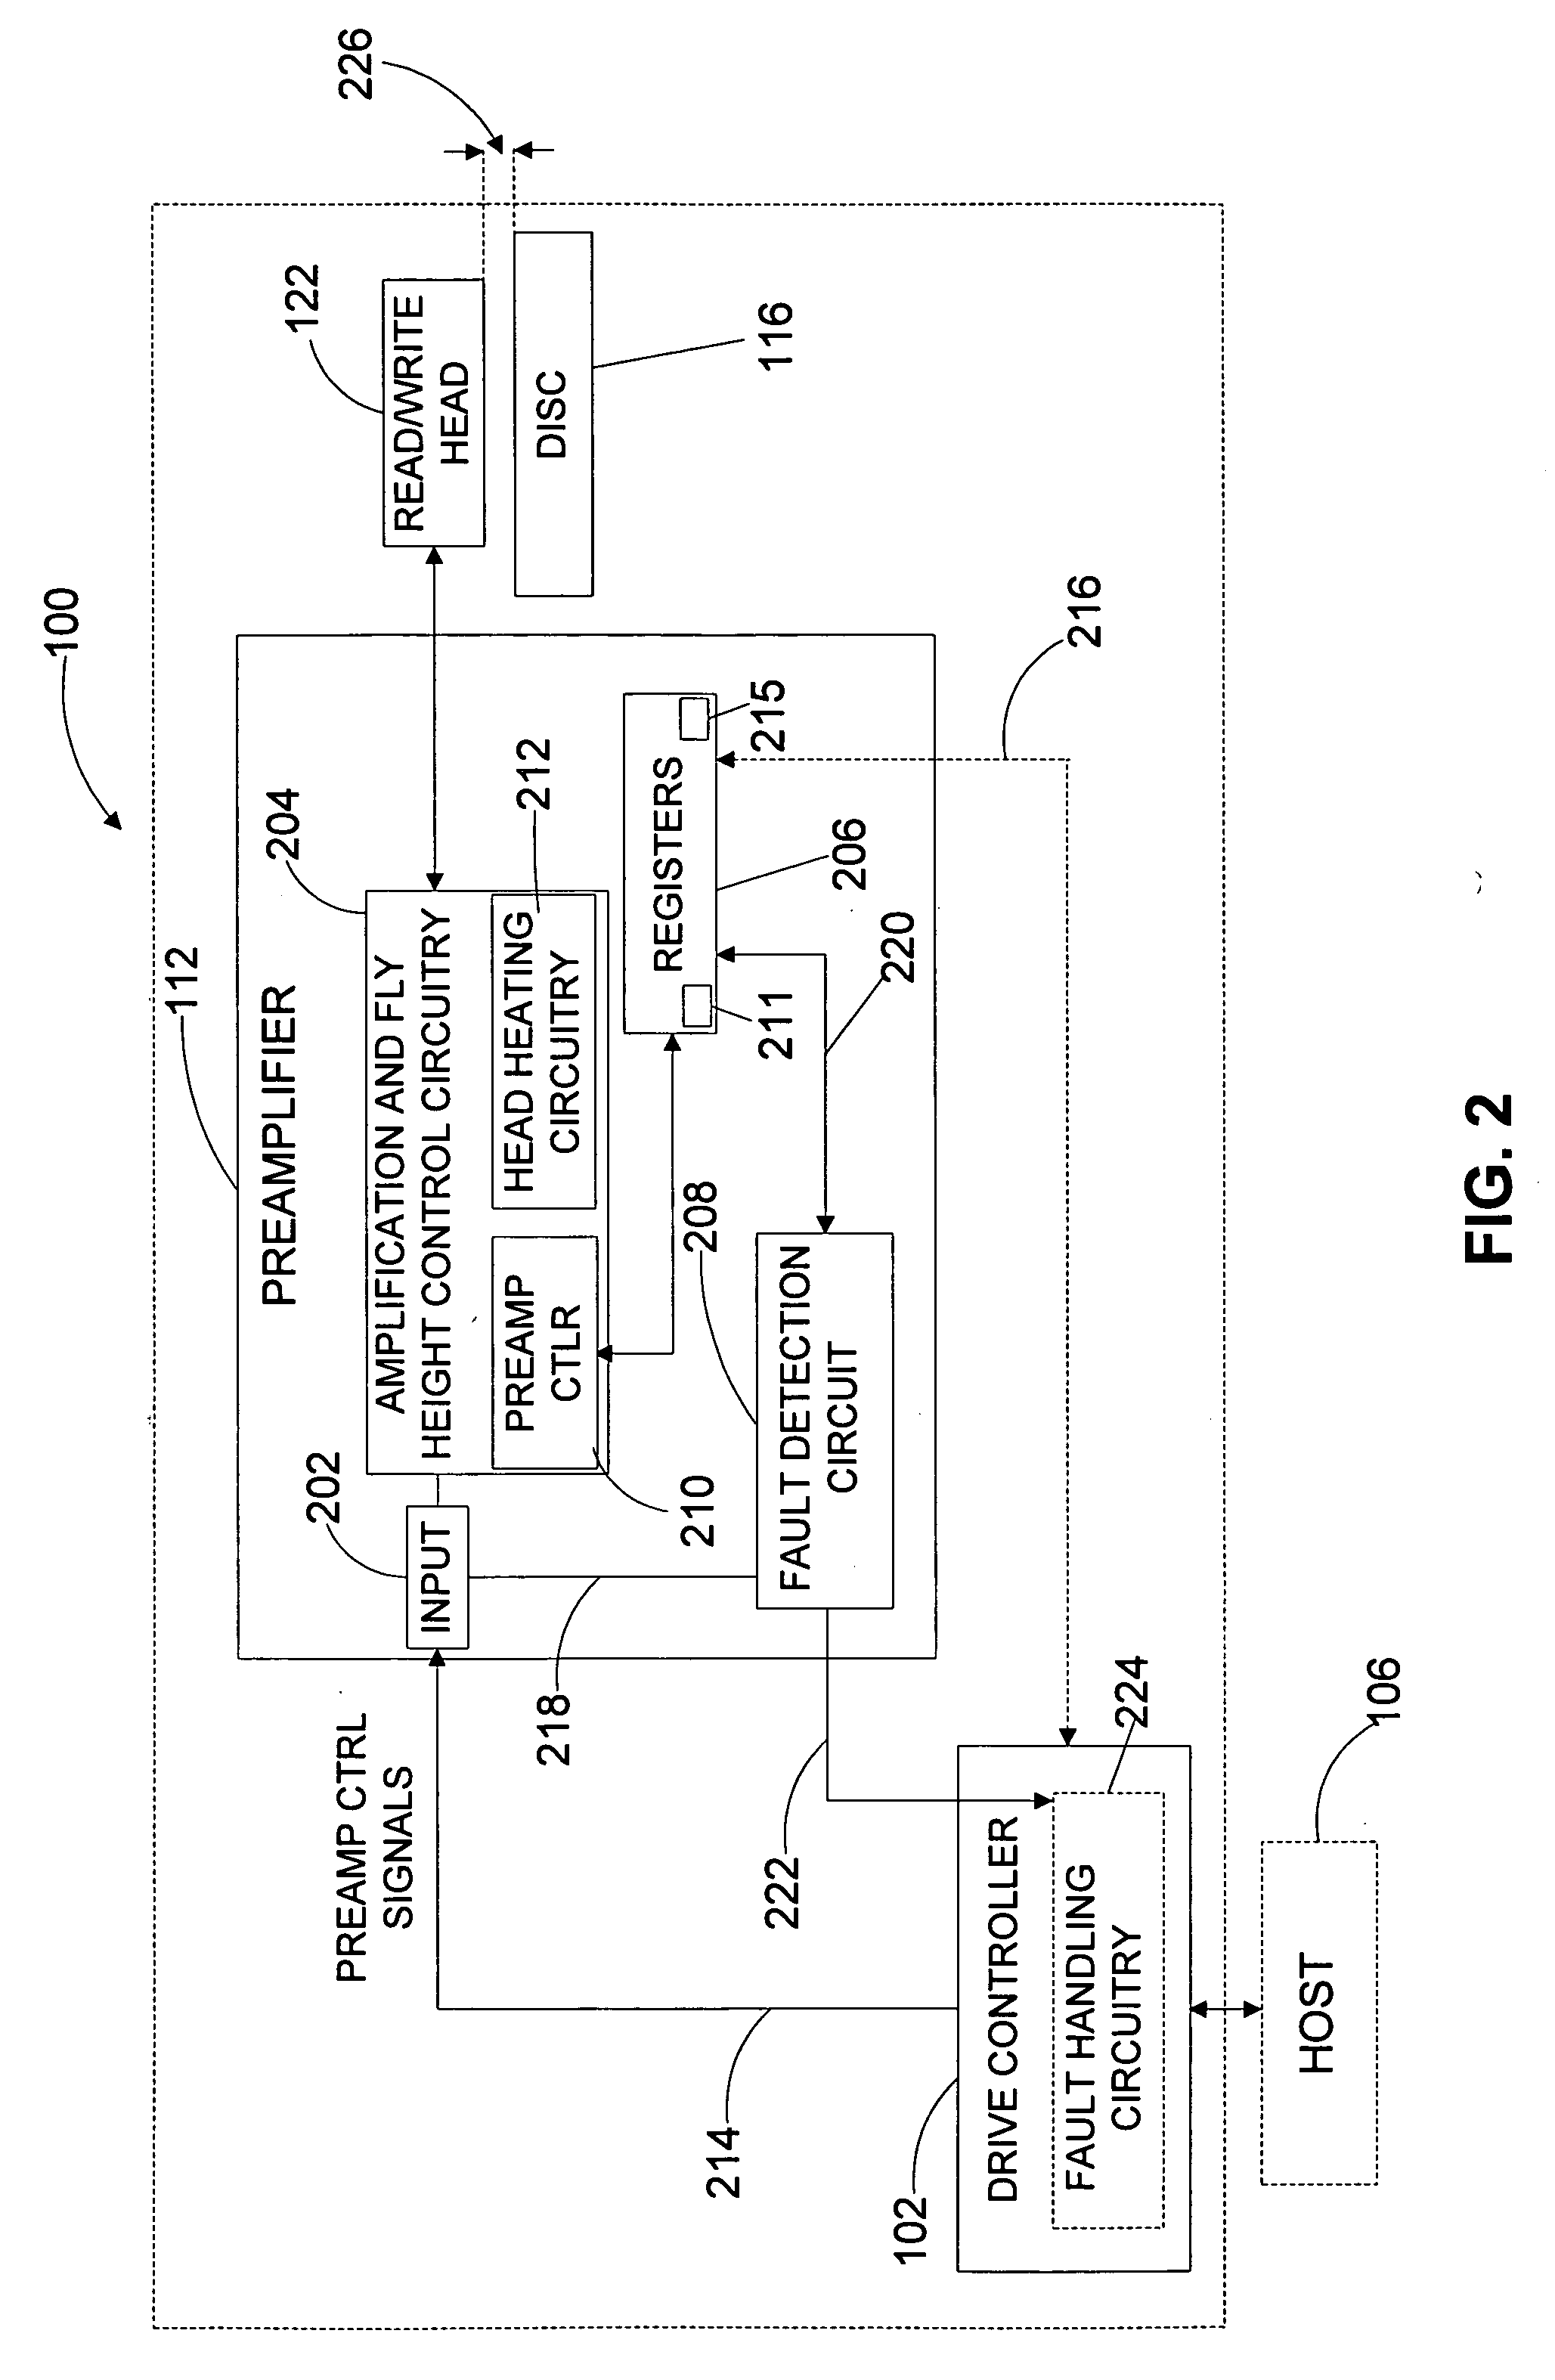 Preamplifier for use in data storage devices